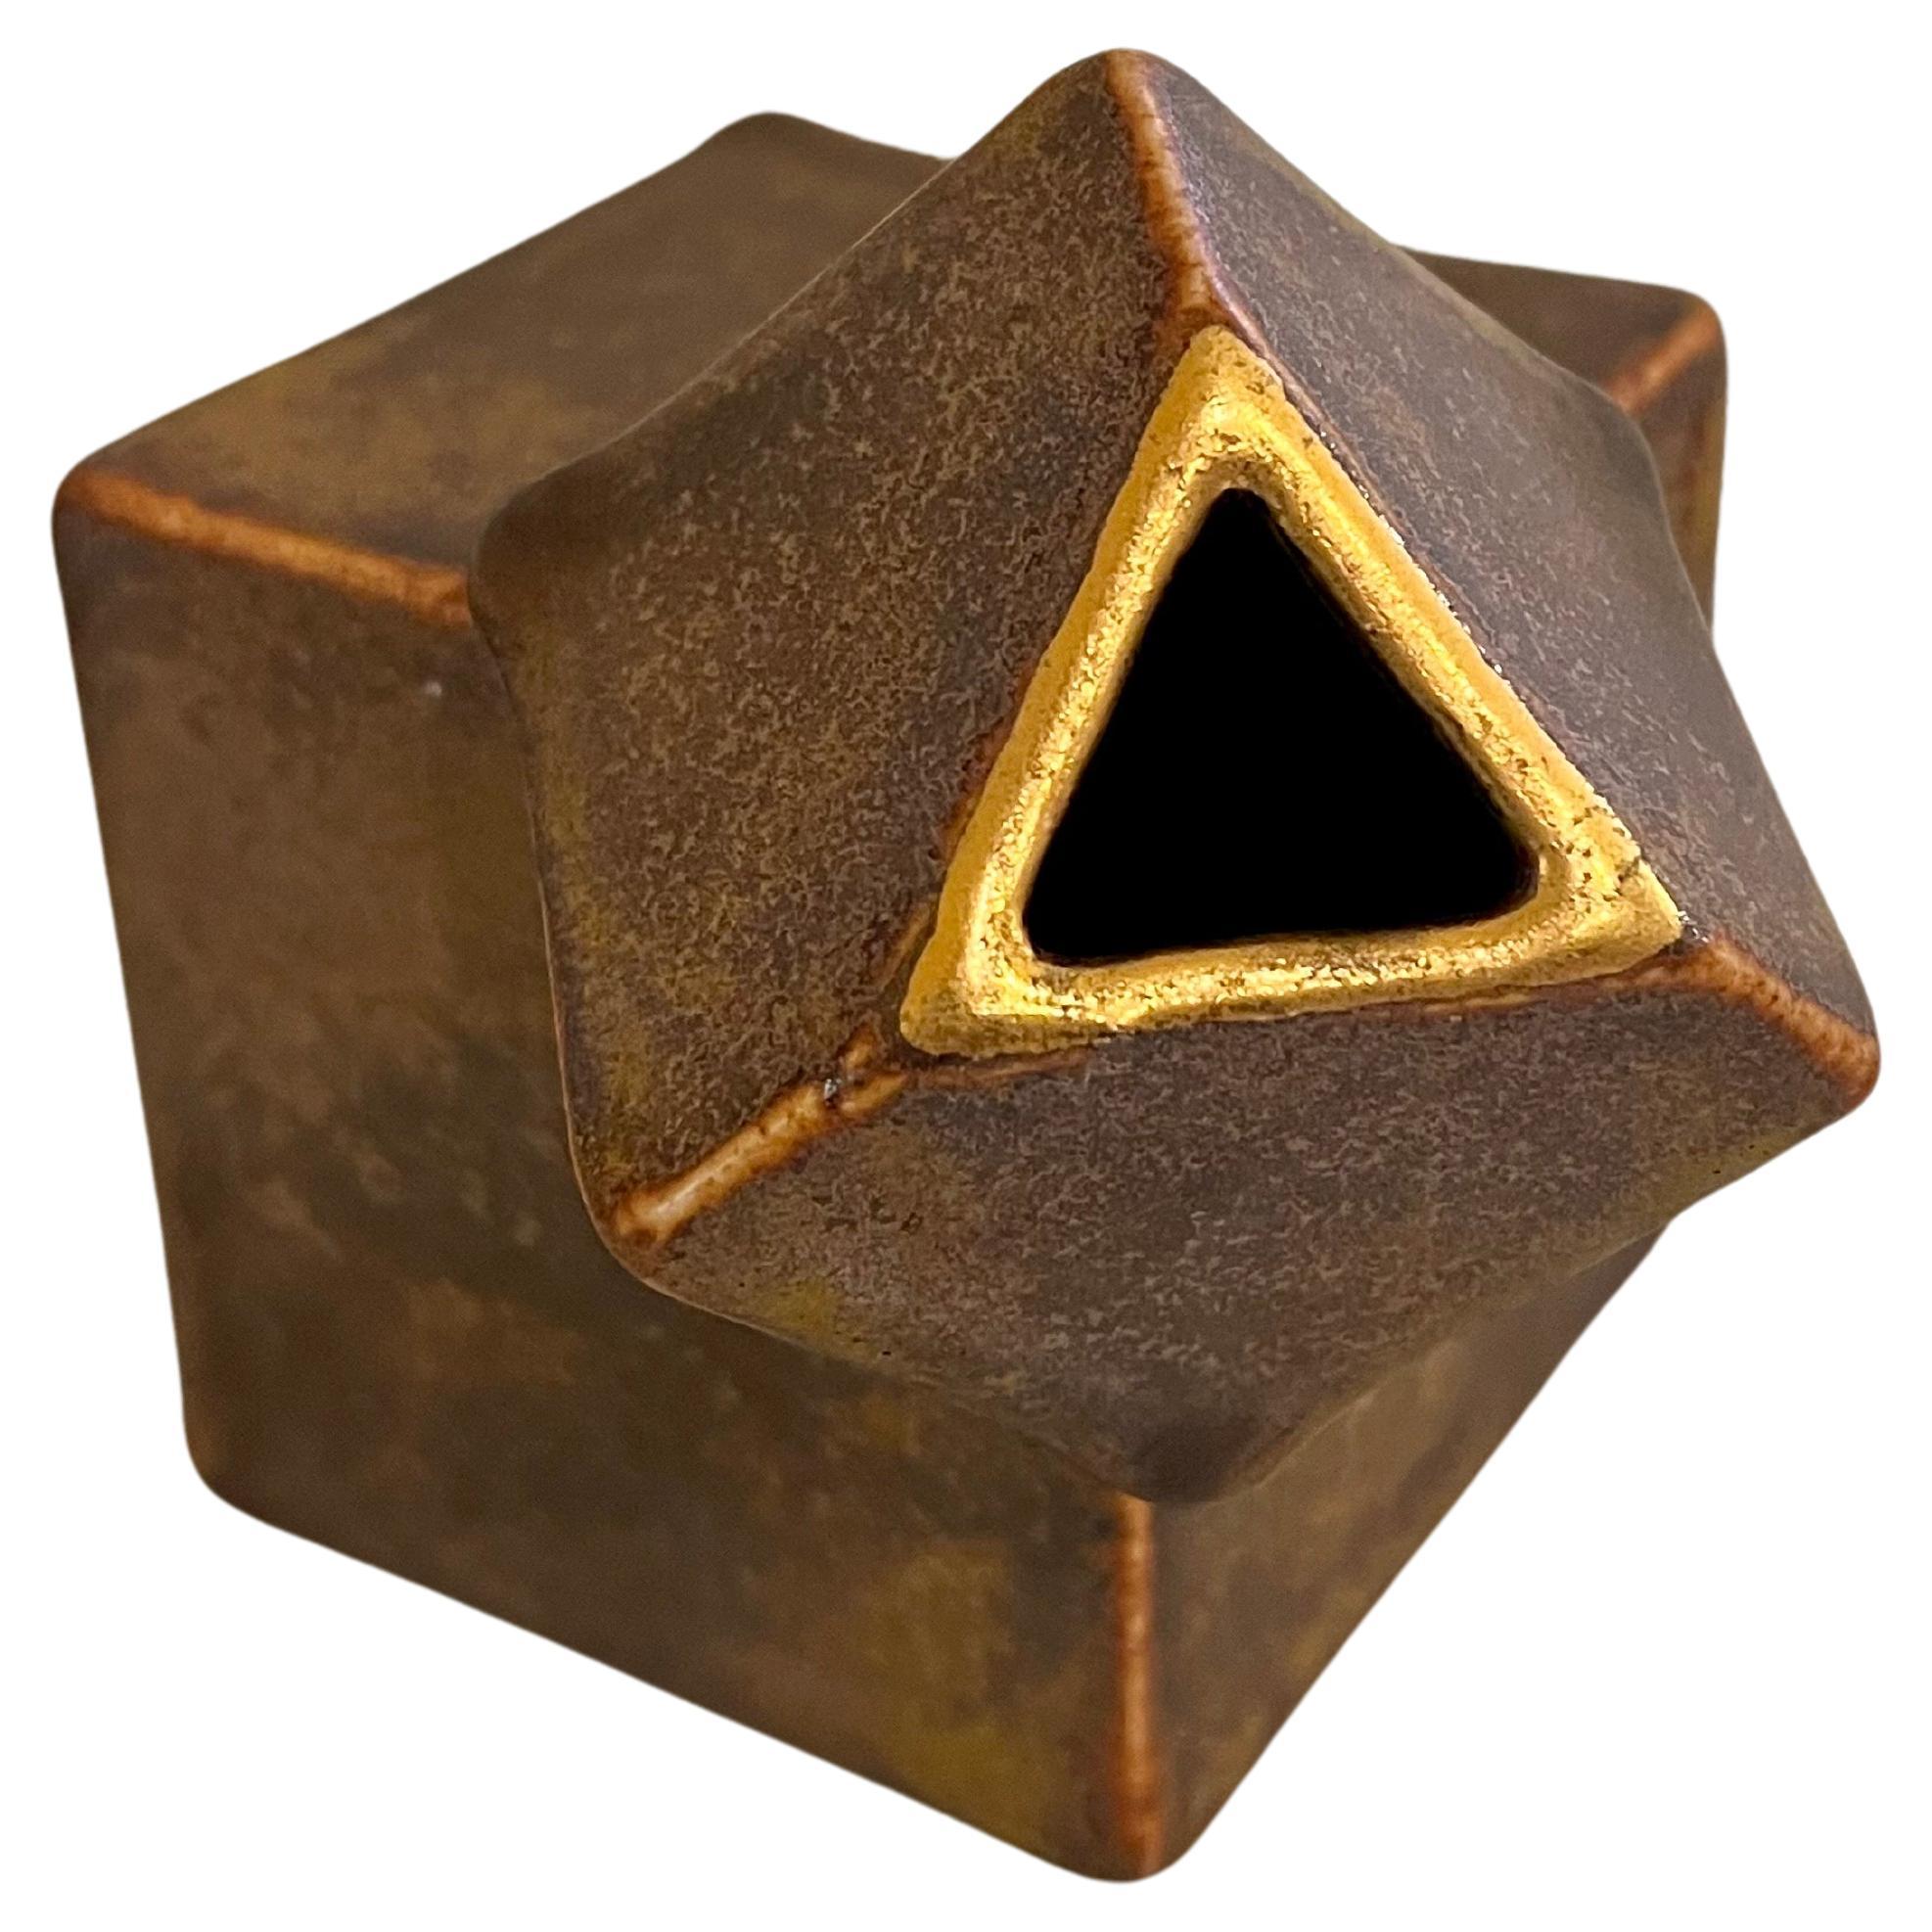 California Design Geometric Cube Vase Maroon by Pierre Bounaud  For Sale